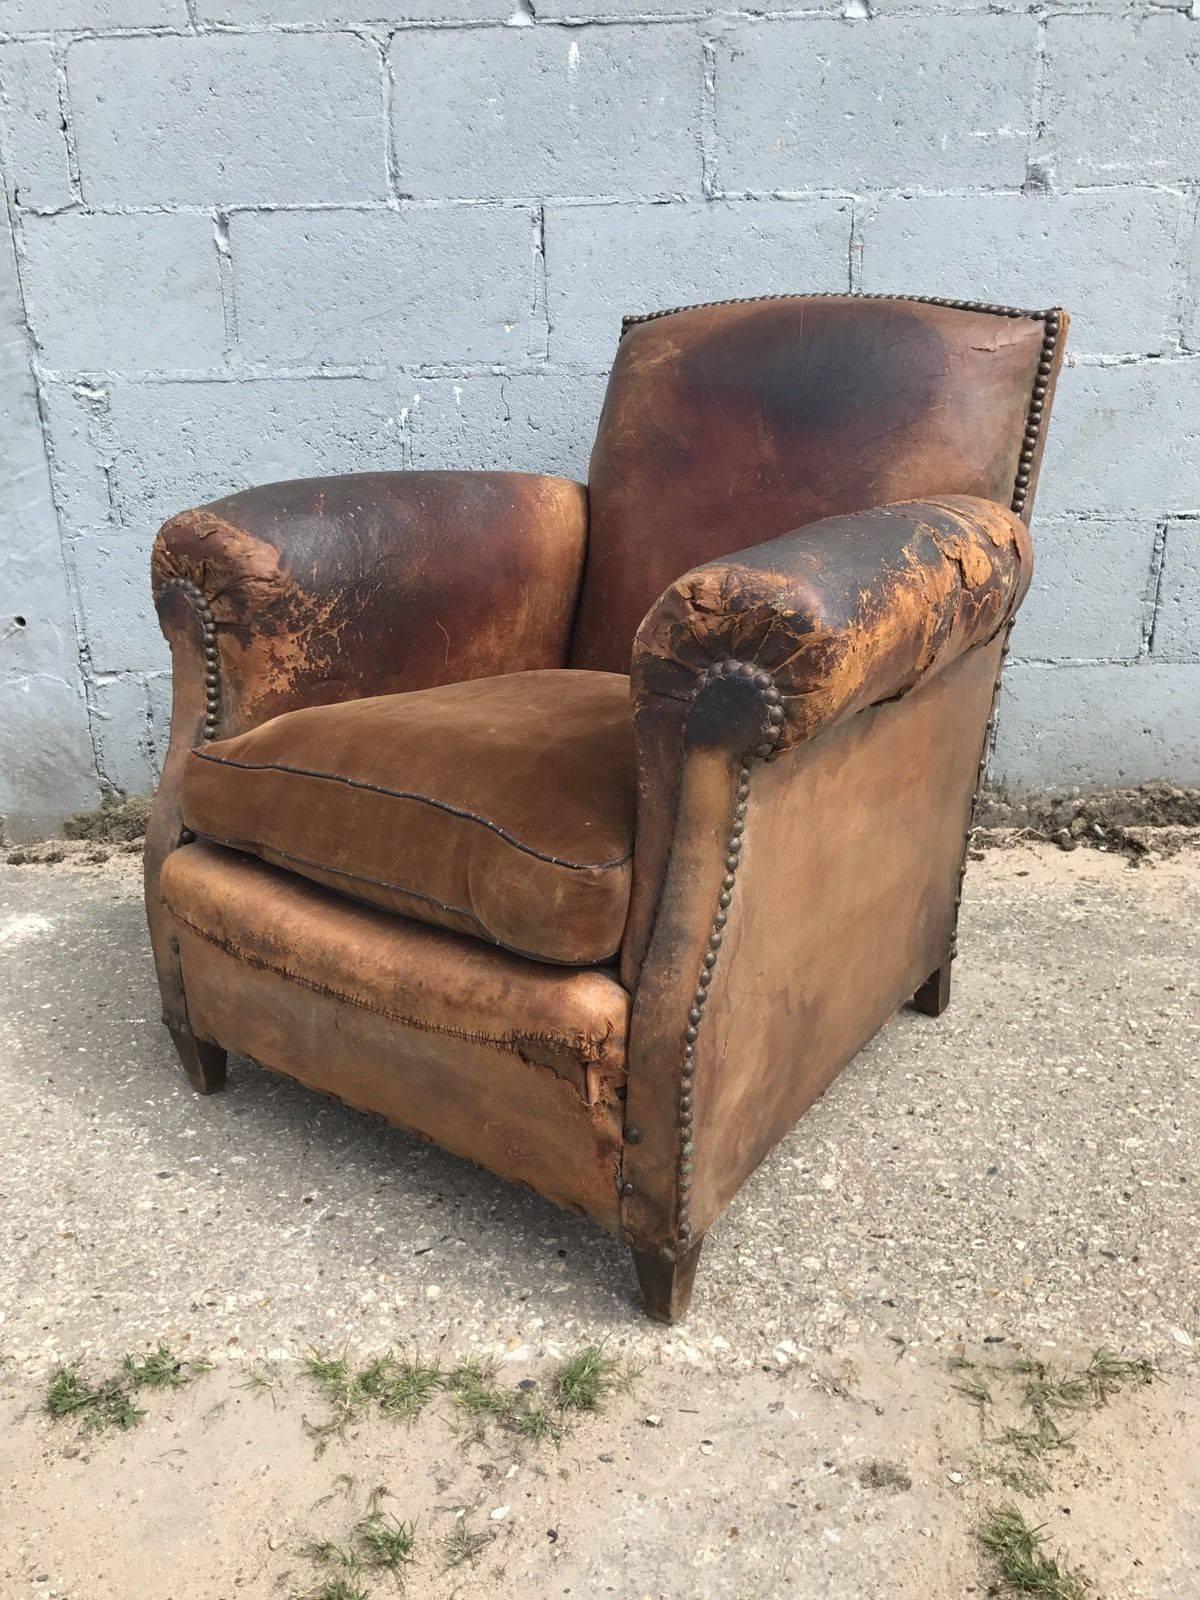 Here we have a beautiful French leather club chair from the very early 1900s. In fantastic worn condition.






































 